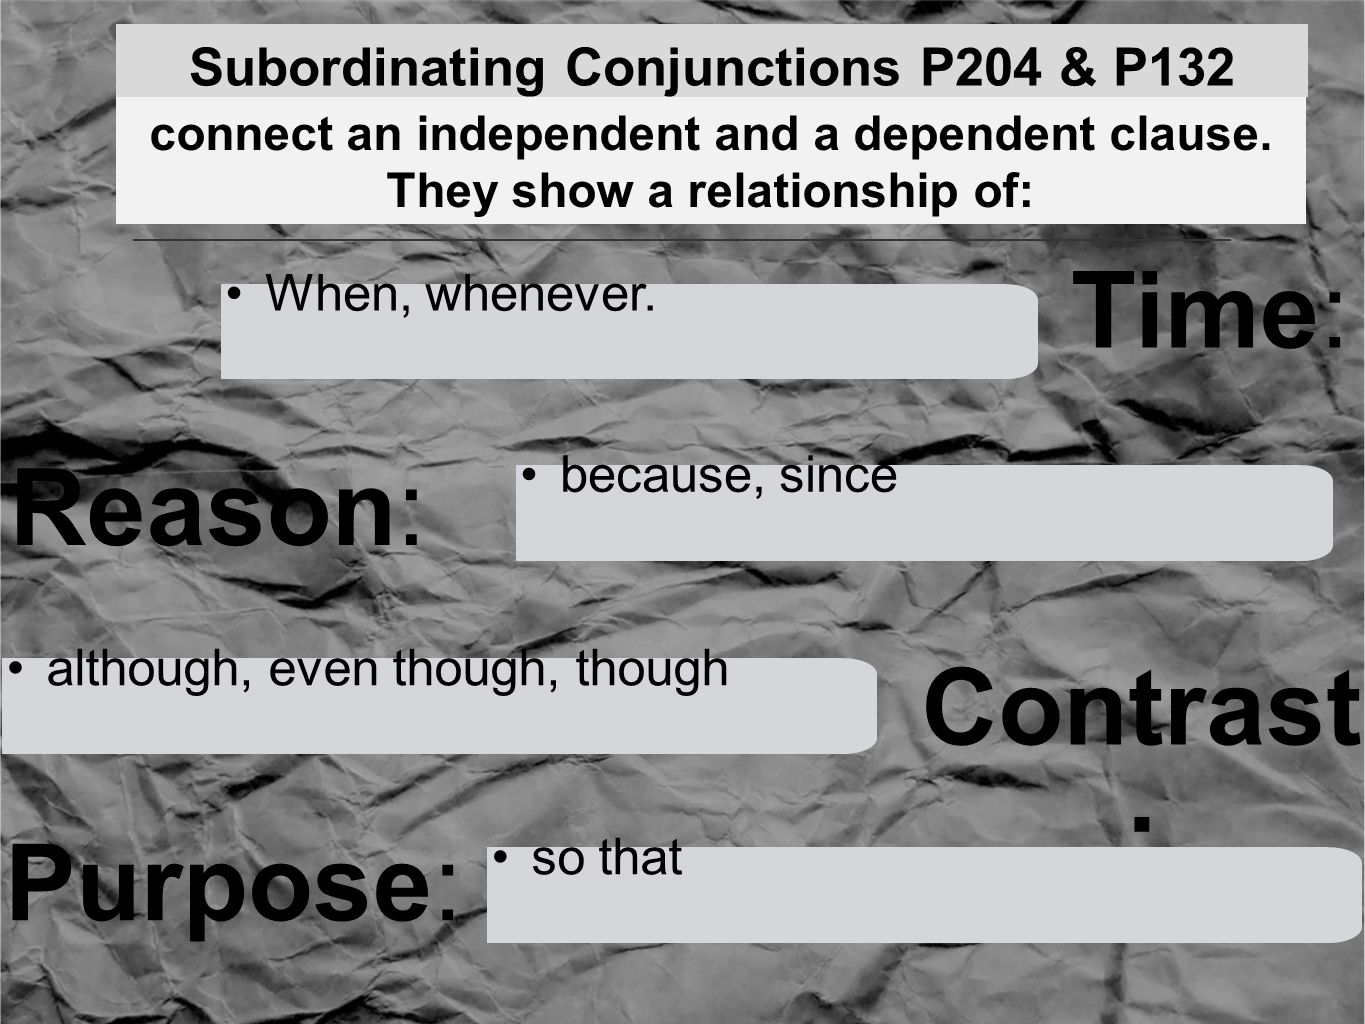 Subordinating Conjunctions P204 & P132 Time: When, whenever.